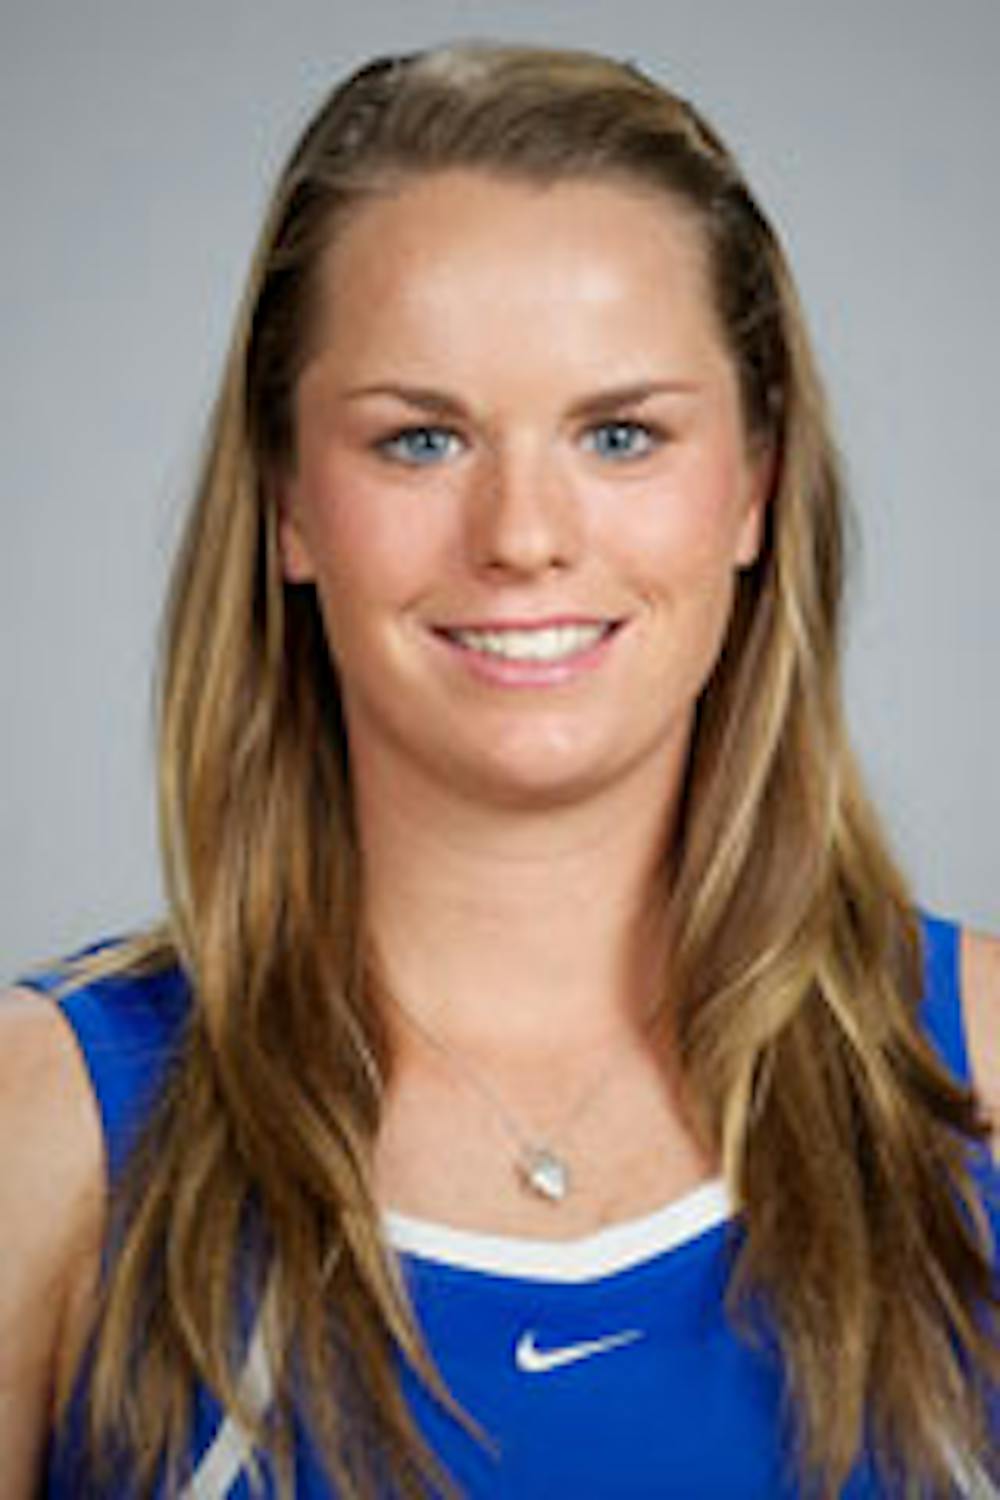 <p>Freshman Belinda Woolcock (above) beat three competitors in the pre-qualifying rounds to earn herself a spot in qualifying play&nbsp;at the Riviera/Intercollegiate Tennis Association’s All-American tournament in California.</p>